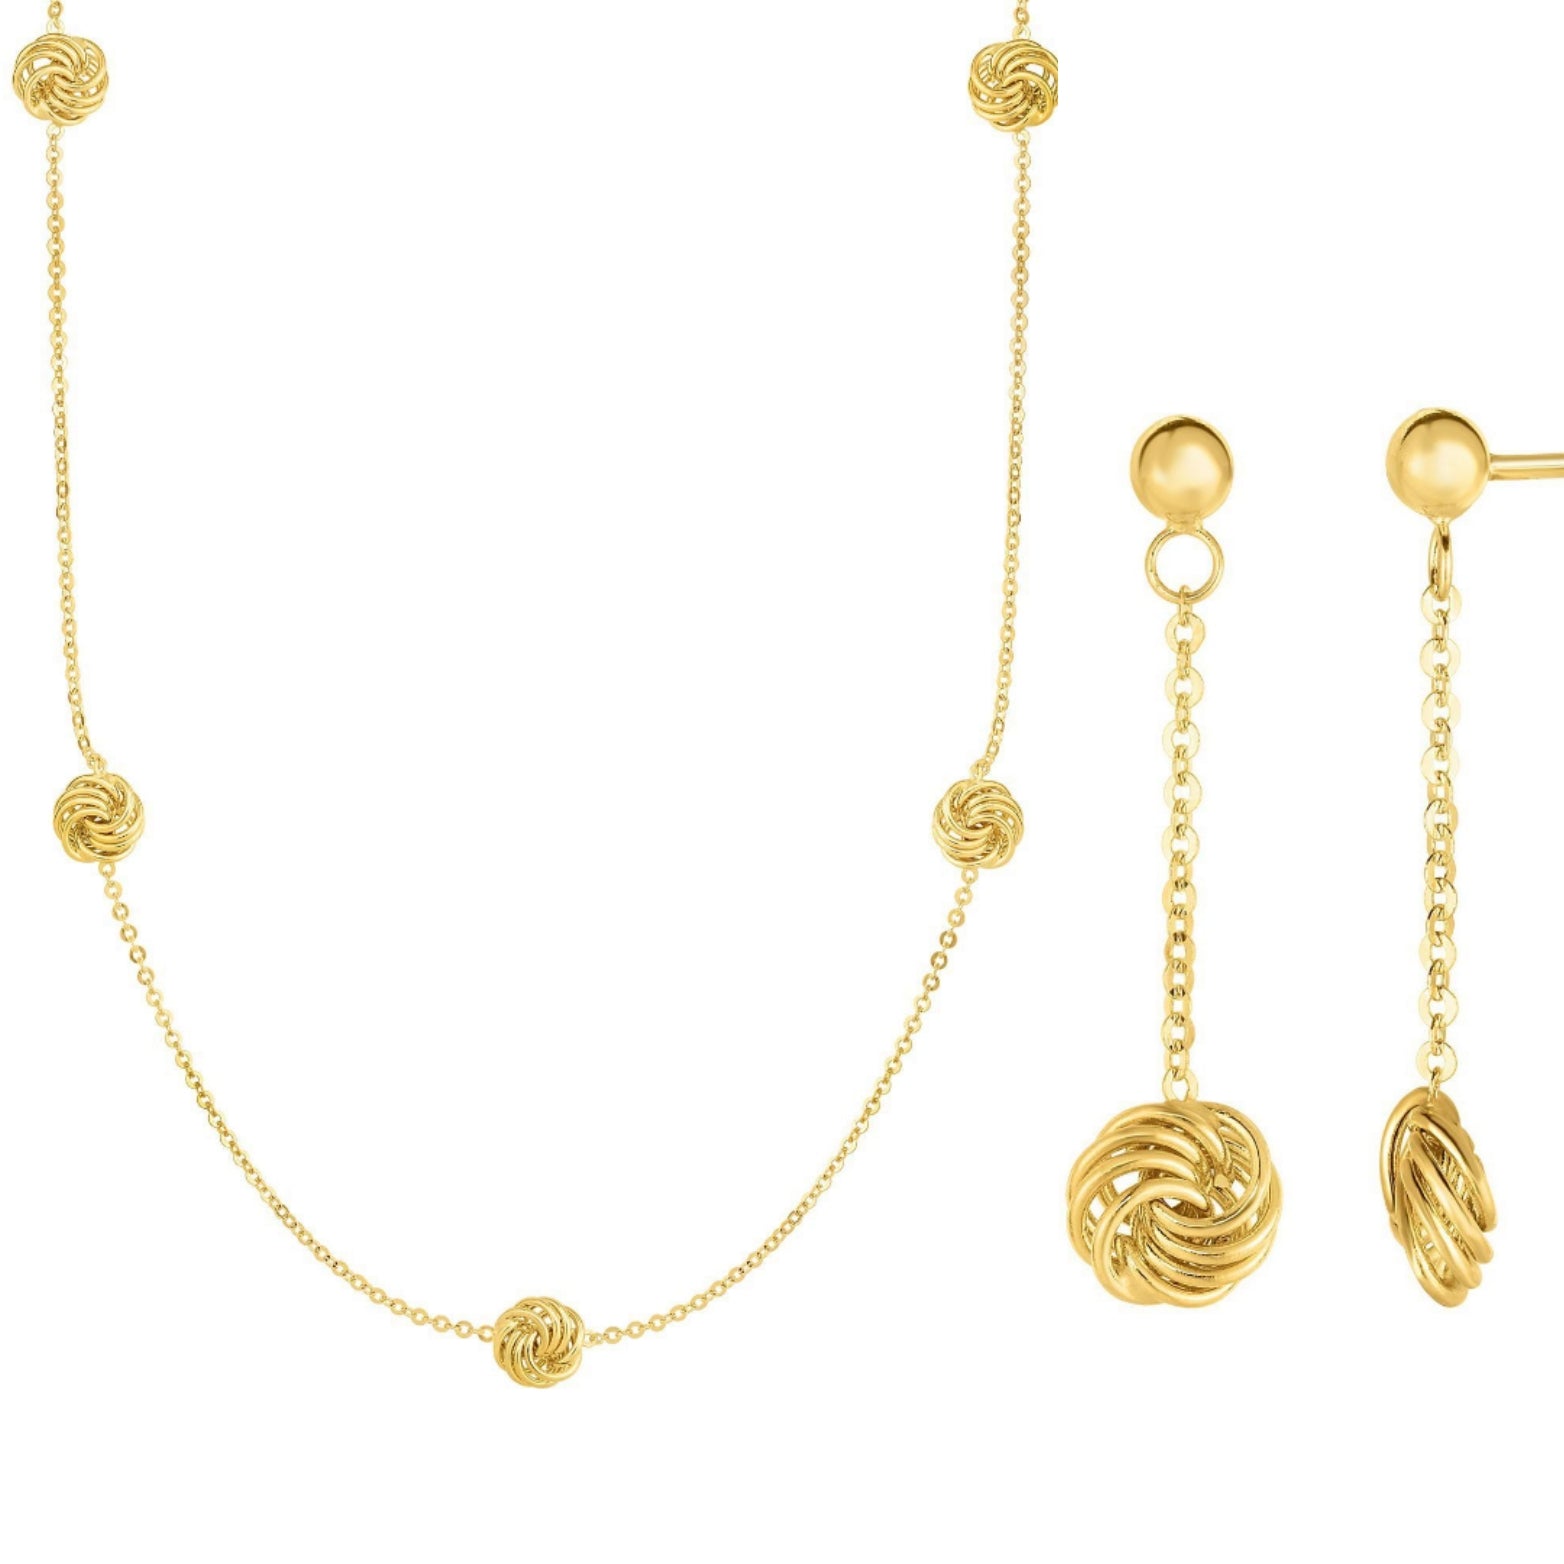 Minimalist Solid Gold Love Knot Necklace, Earrings or Necklace and Earrings Set - wingroupjewelry